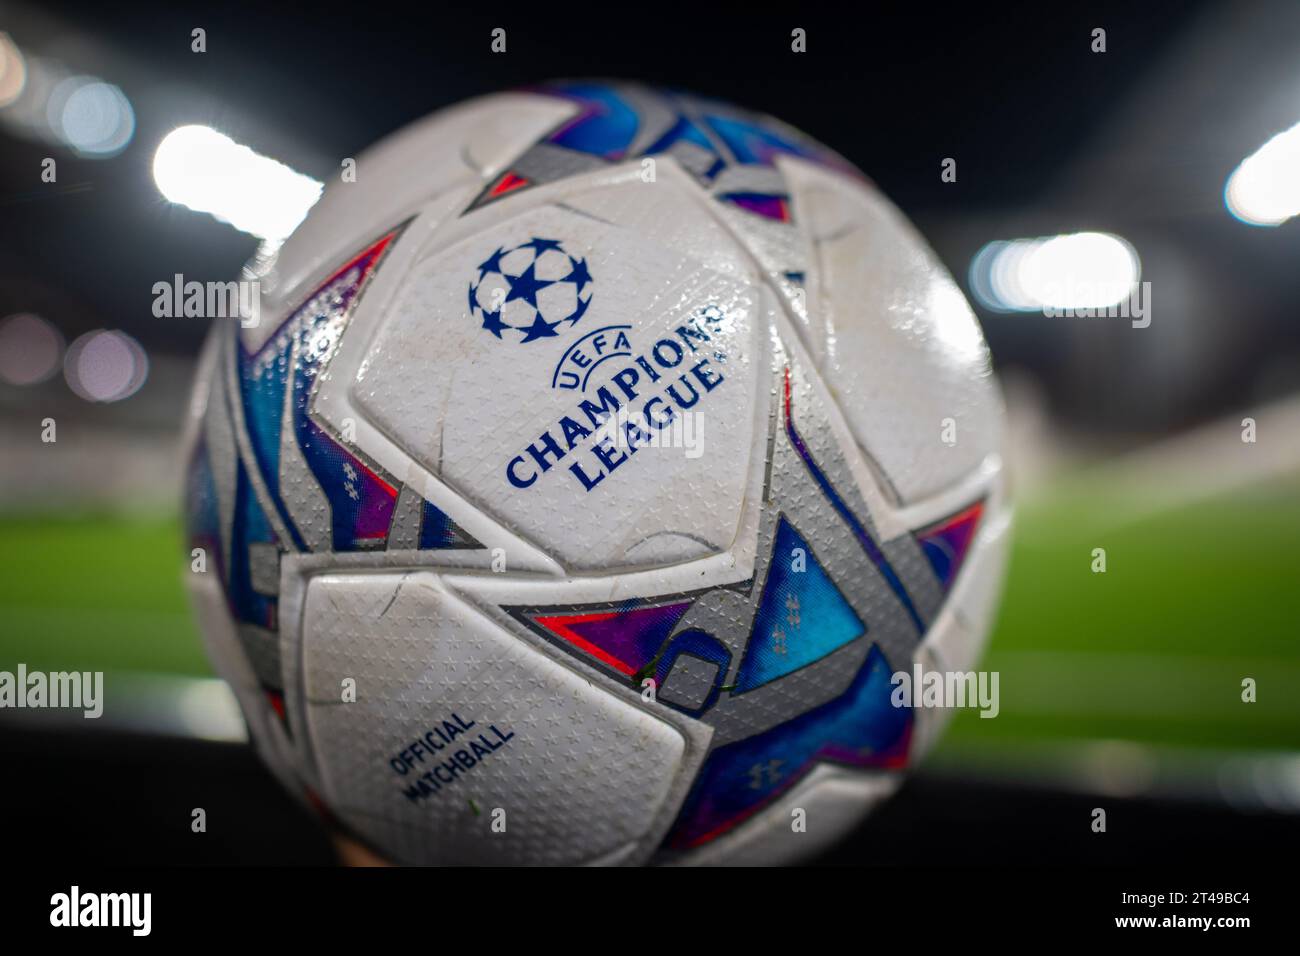 LENS, FRANCE - OCTOBER 24: Official match ball with UEFA Champions League logo during the UEFA Champions League match between RC Lens and PSV Eindhove Stock Photo